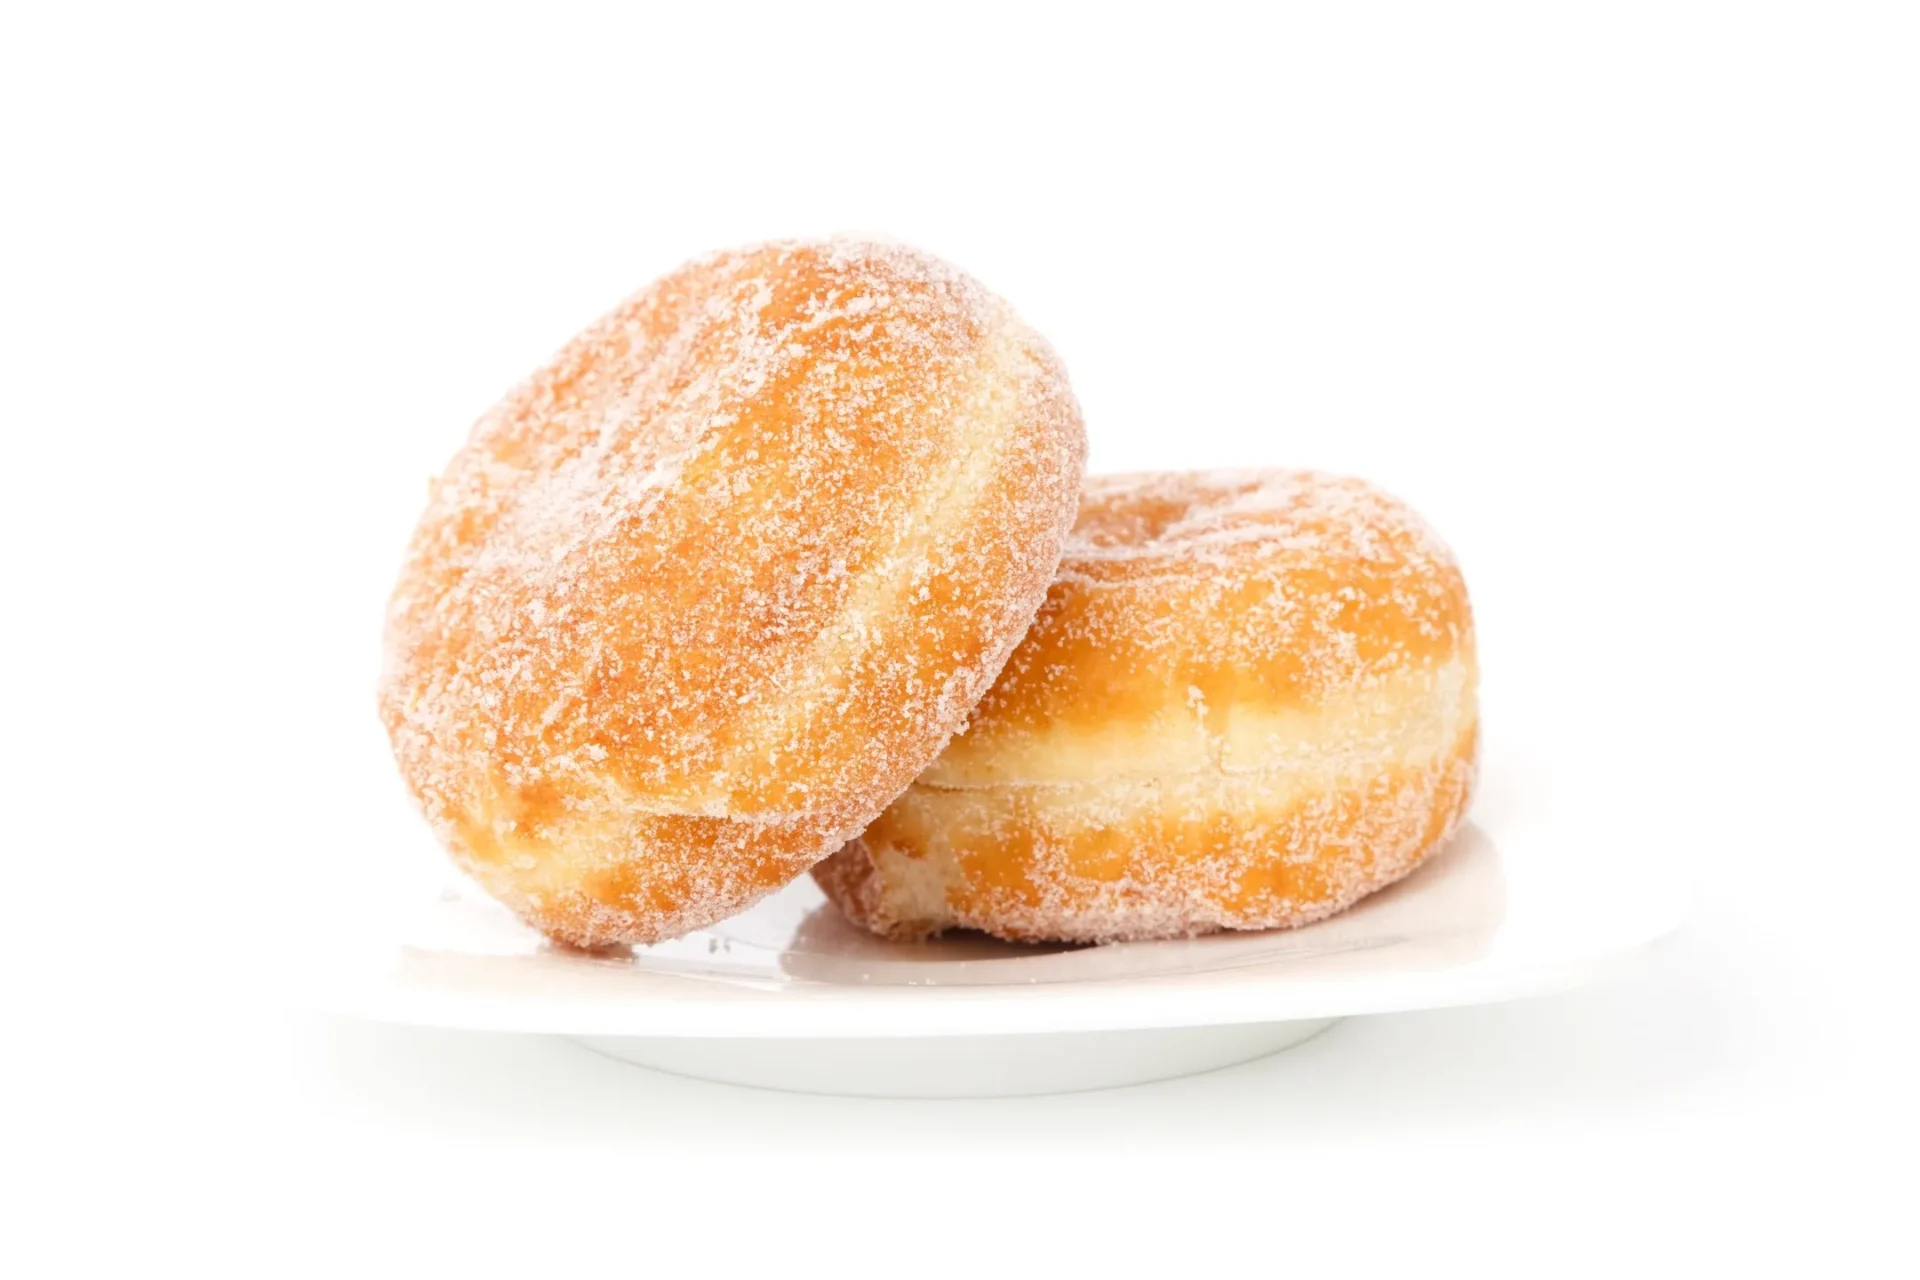 Two sugar donuts on a plate with one sitting up